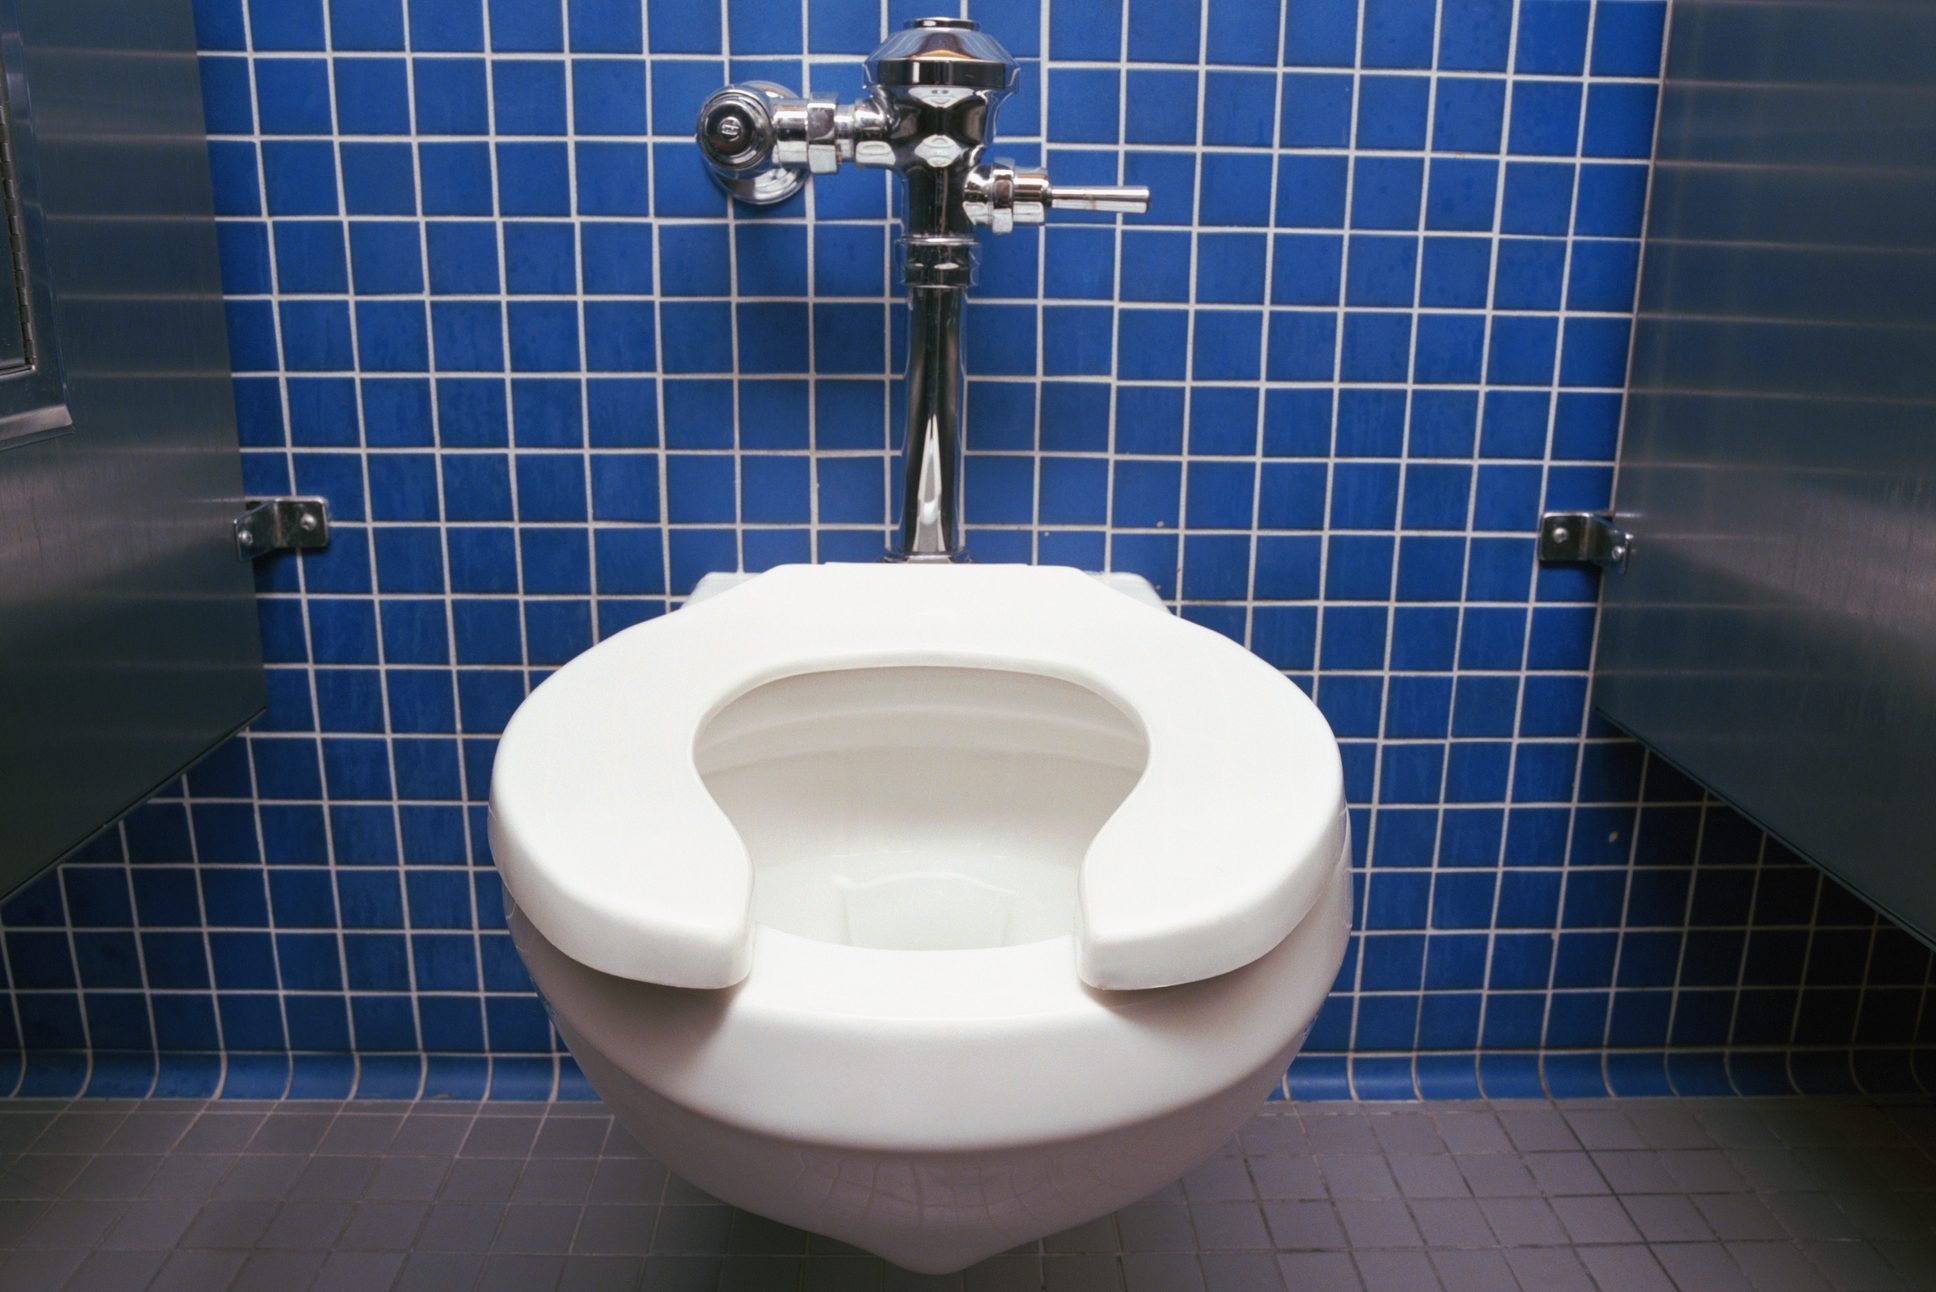 Here’s Why It’s OK to Sit on a Public Toilet Seat